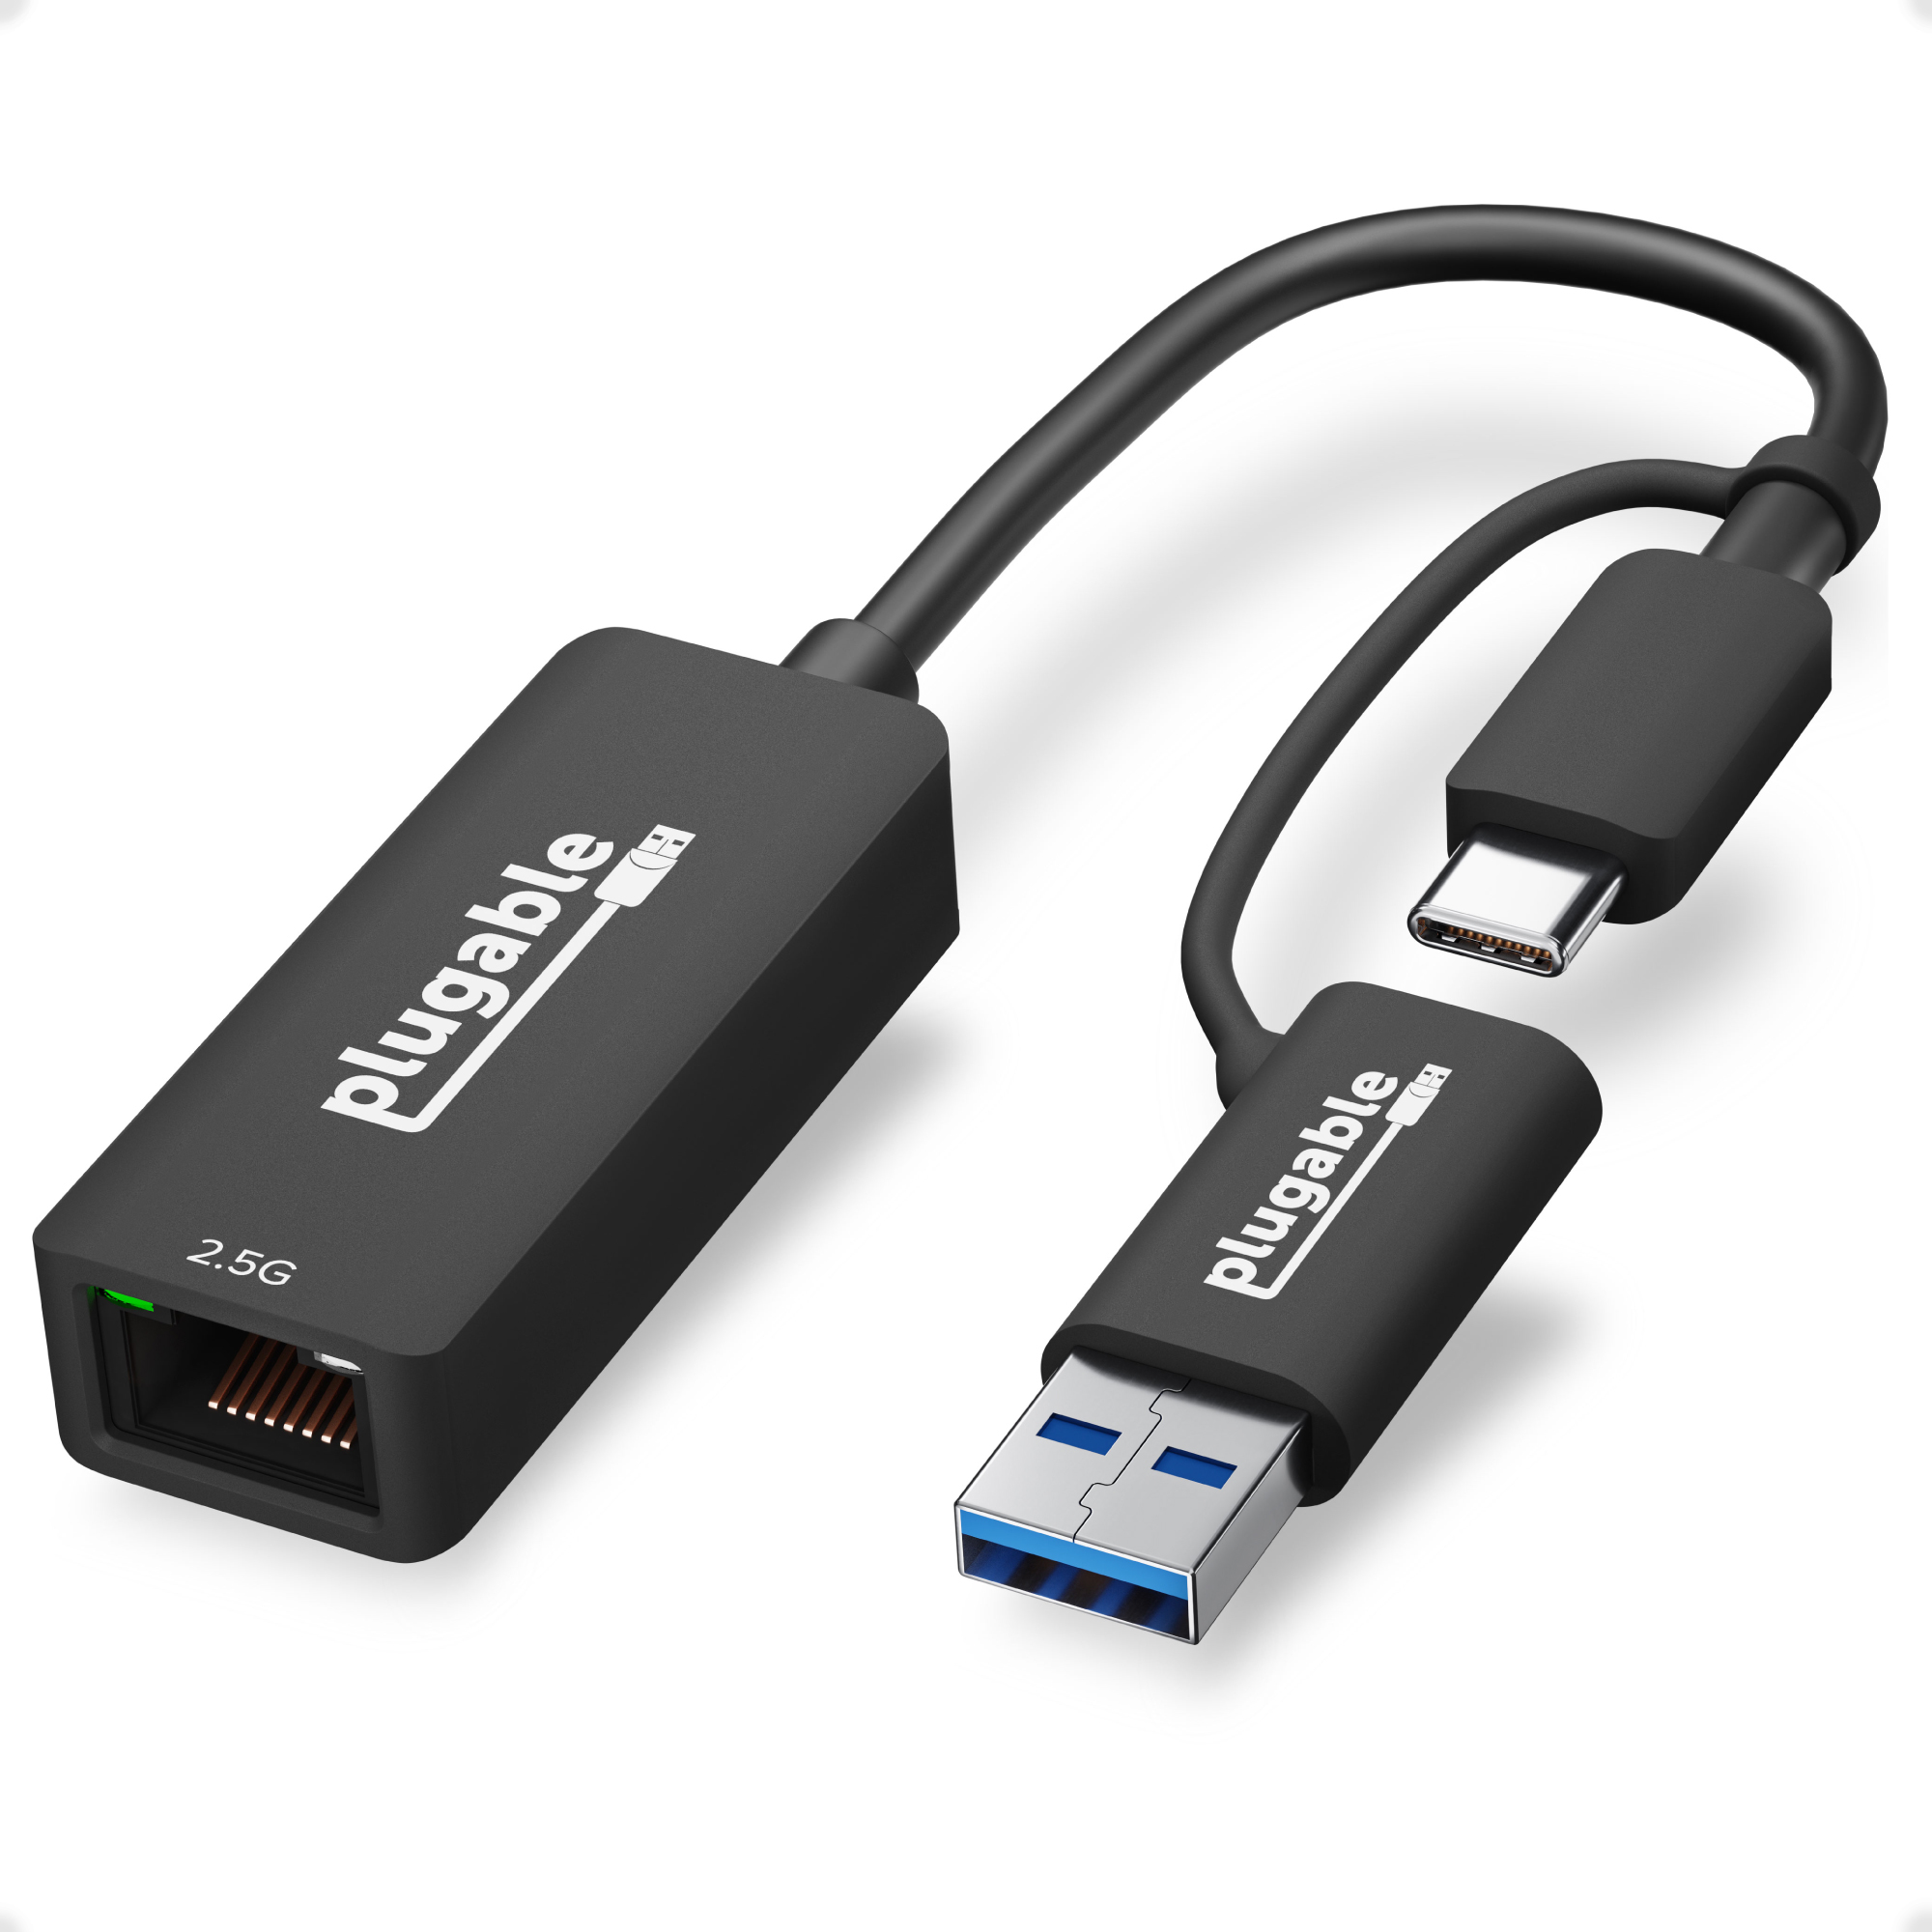 Plugable 2.5G USB C and USB to Ethernet Adapter, 2-in-1 Adapter Compatible  with USB-C Thunderbolt or USB 3.0, USB-C to RJ45 2.5 Gigabit LAN Ethernet,  Compatible with Mac and Windows